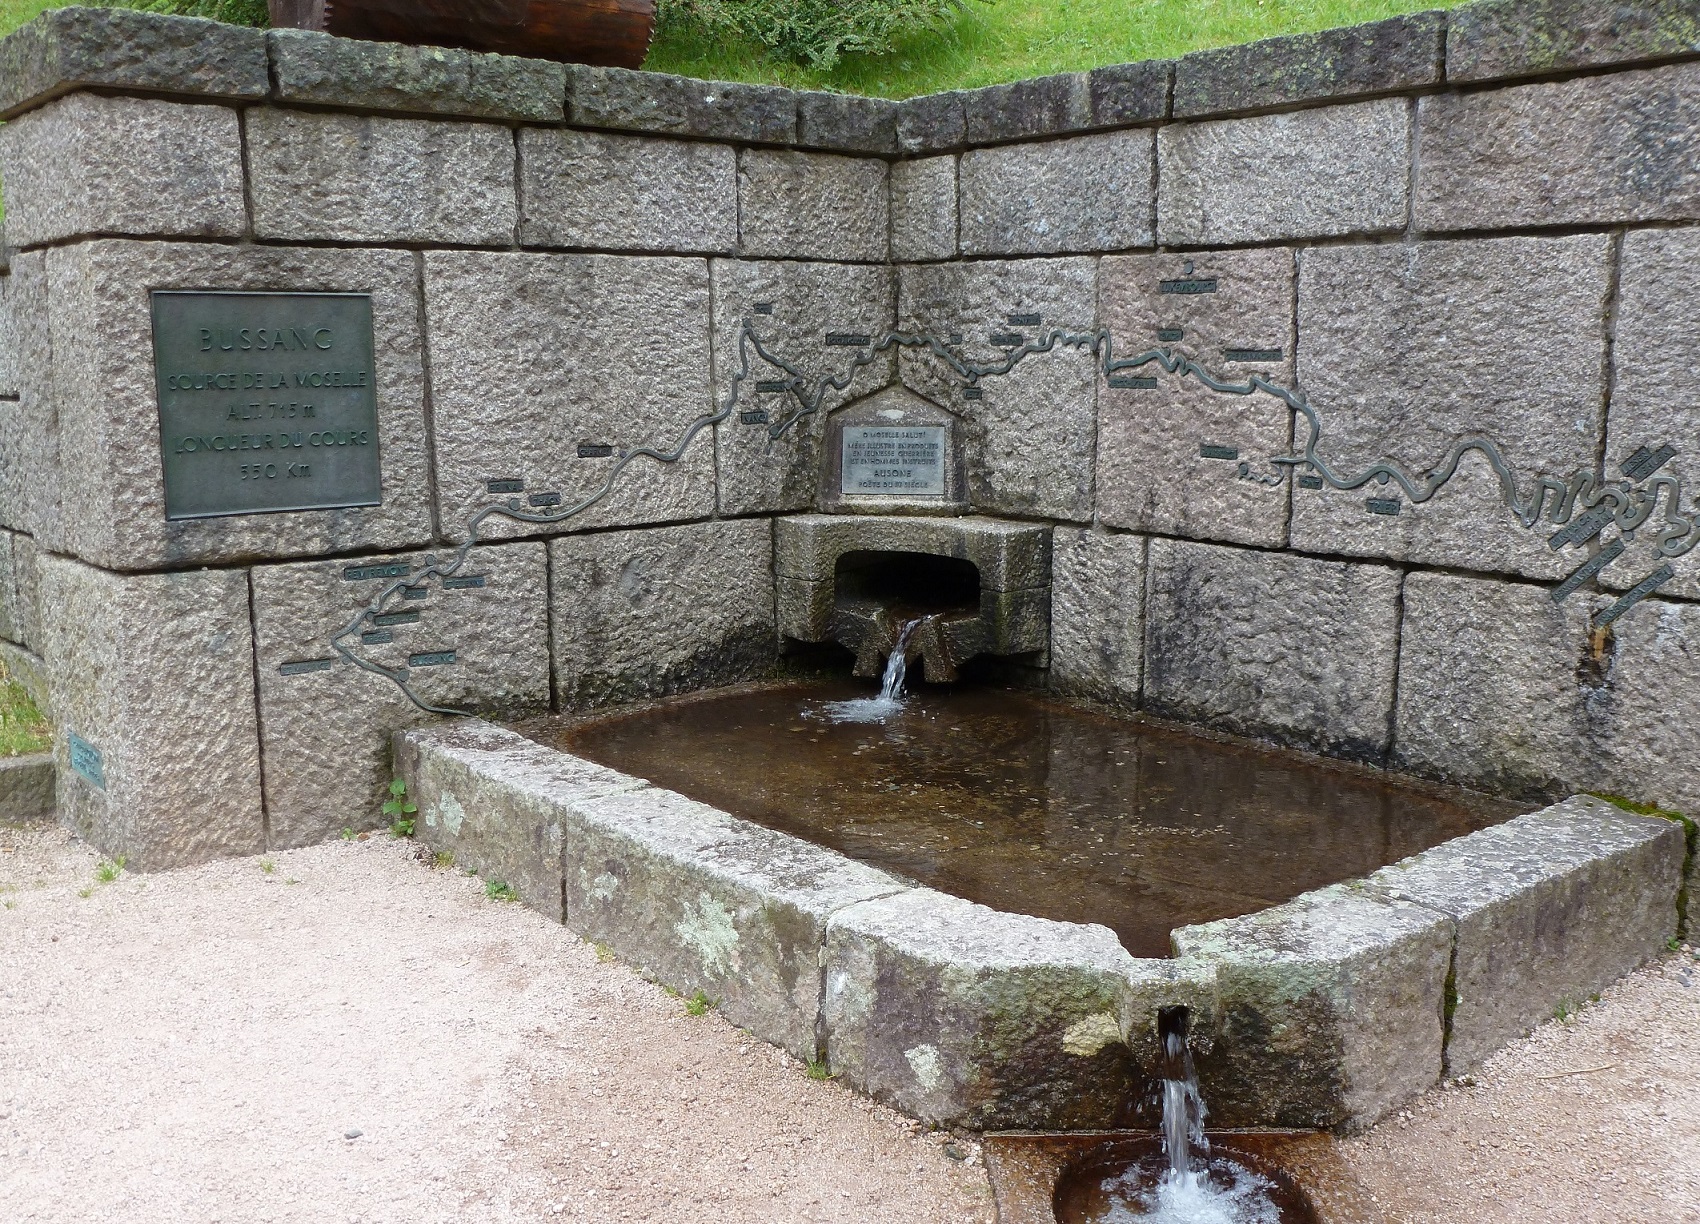 Plaque and spring at Source.